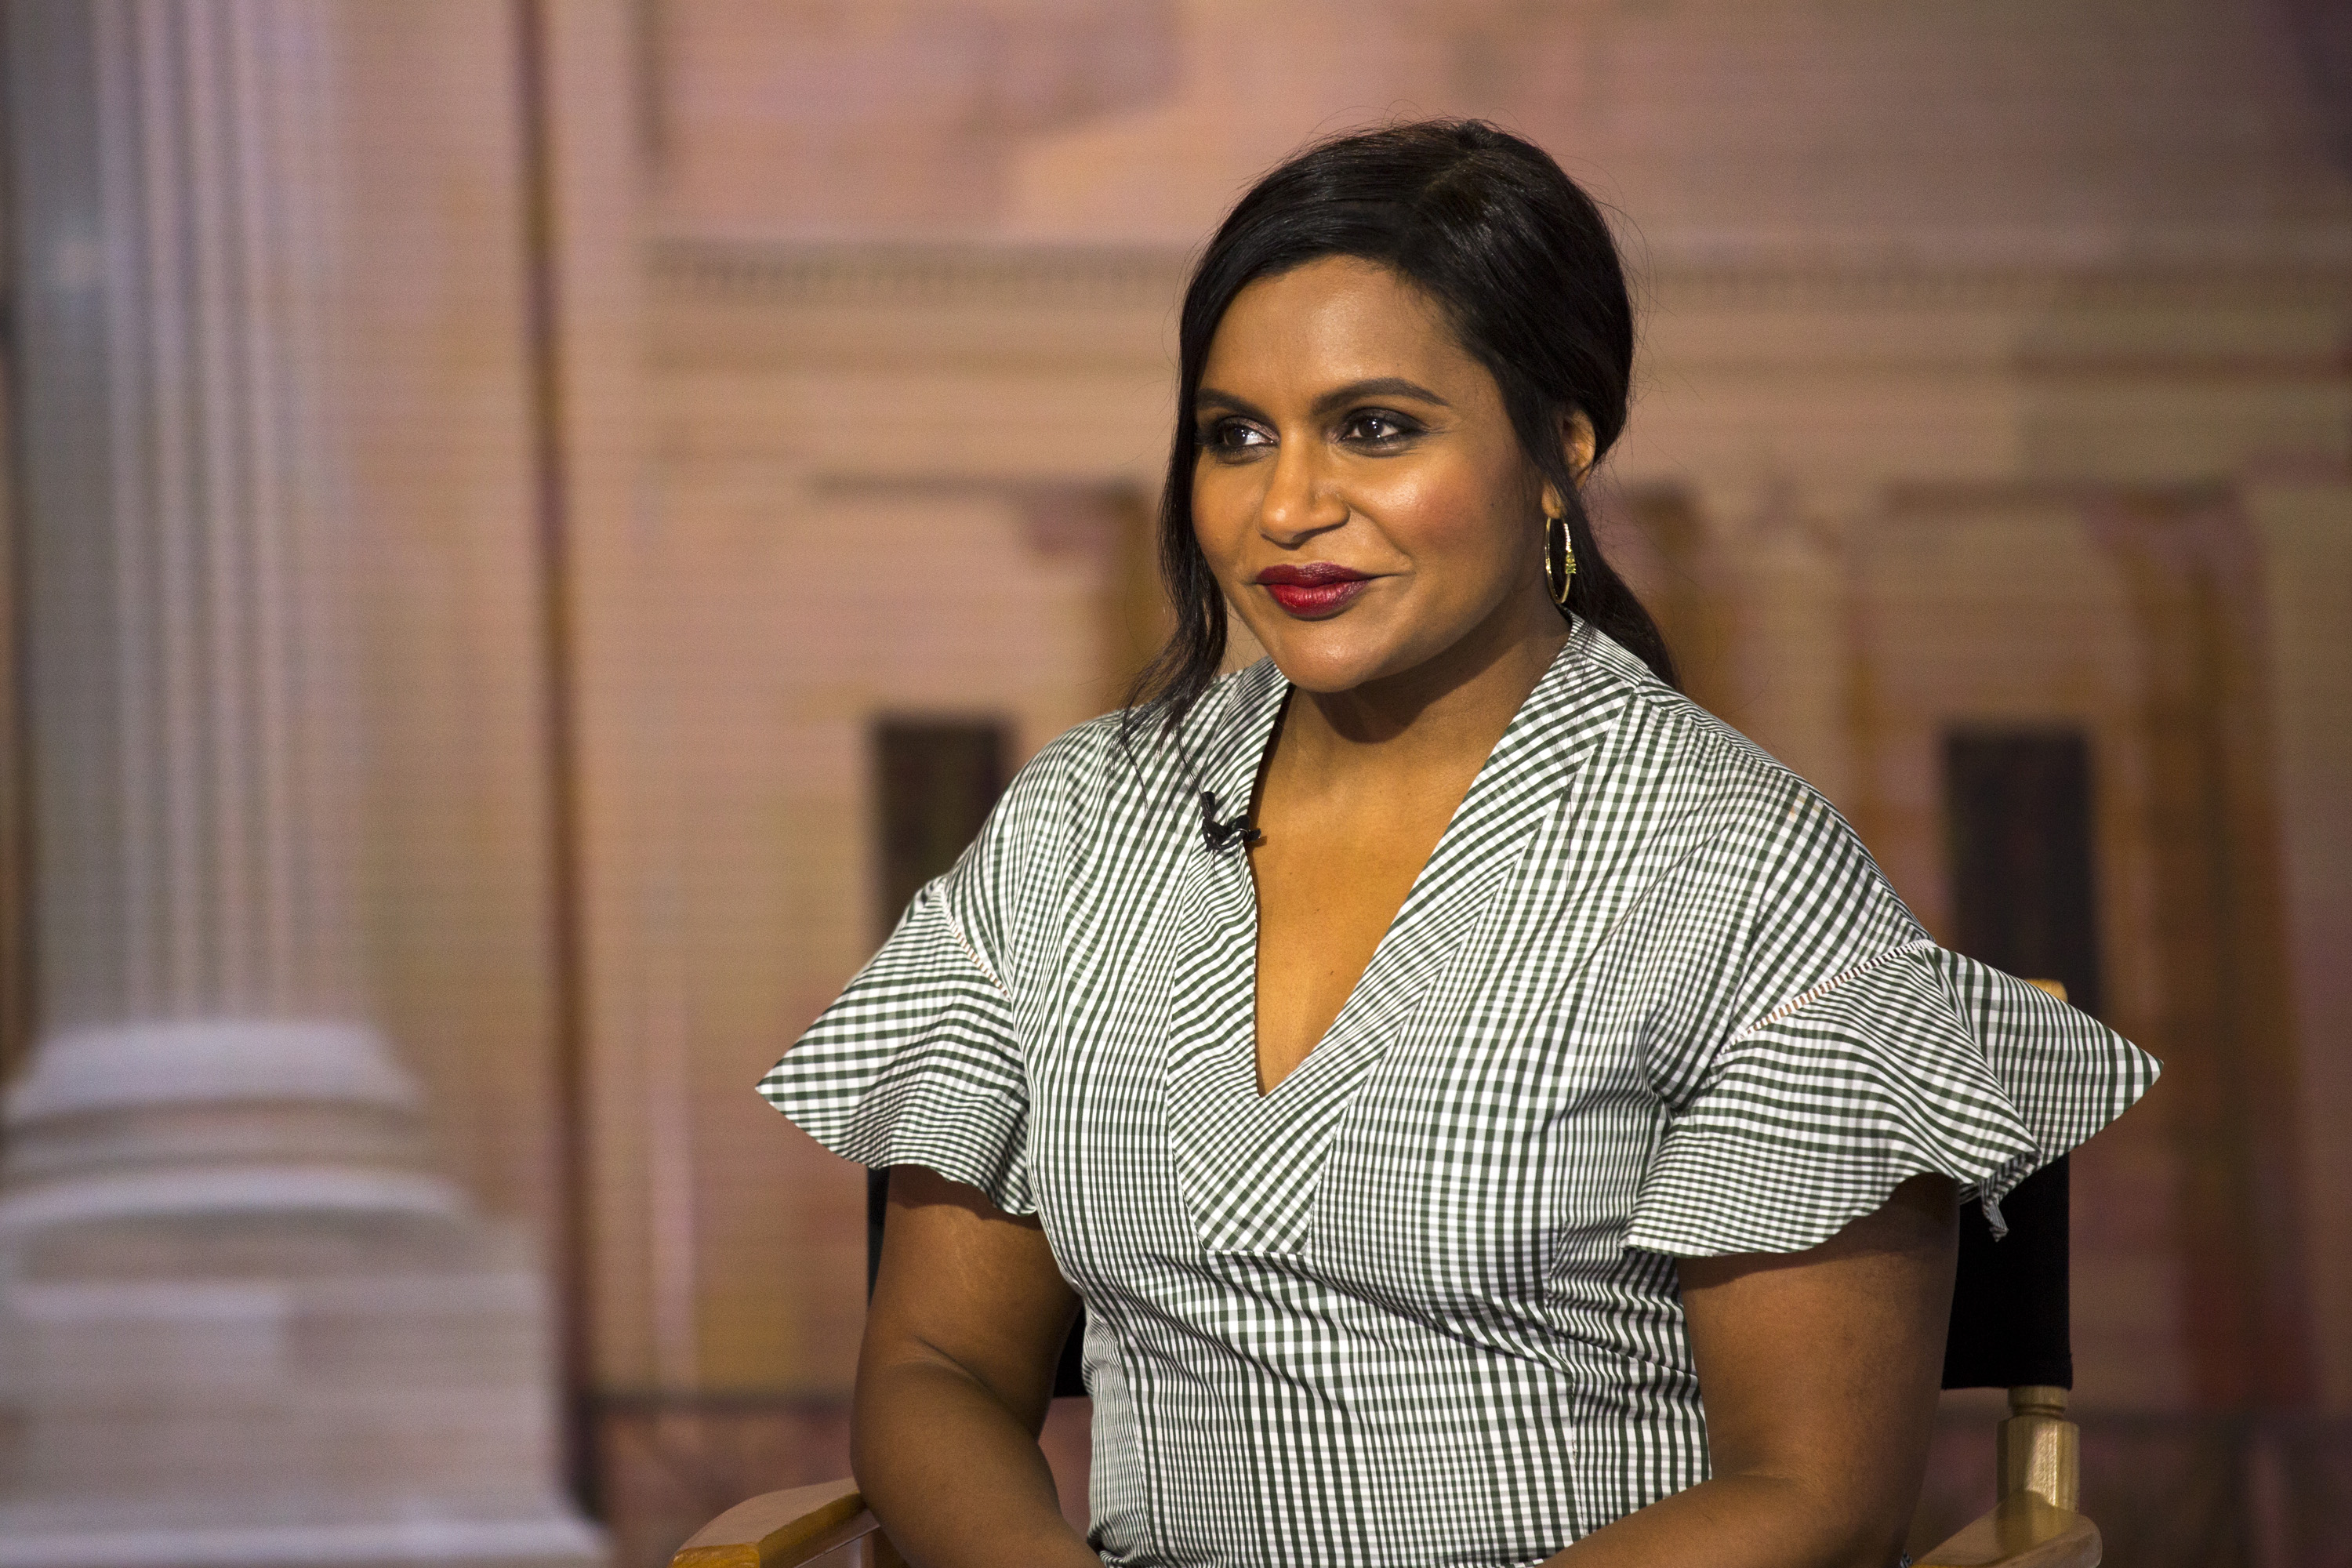 Mindy Kaling on June 7, 2018 (Zach Pagano—NBC/Getty Images)